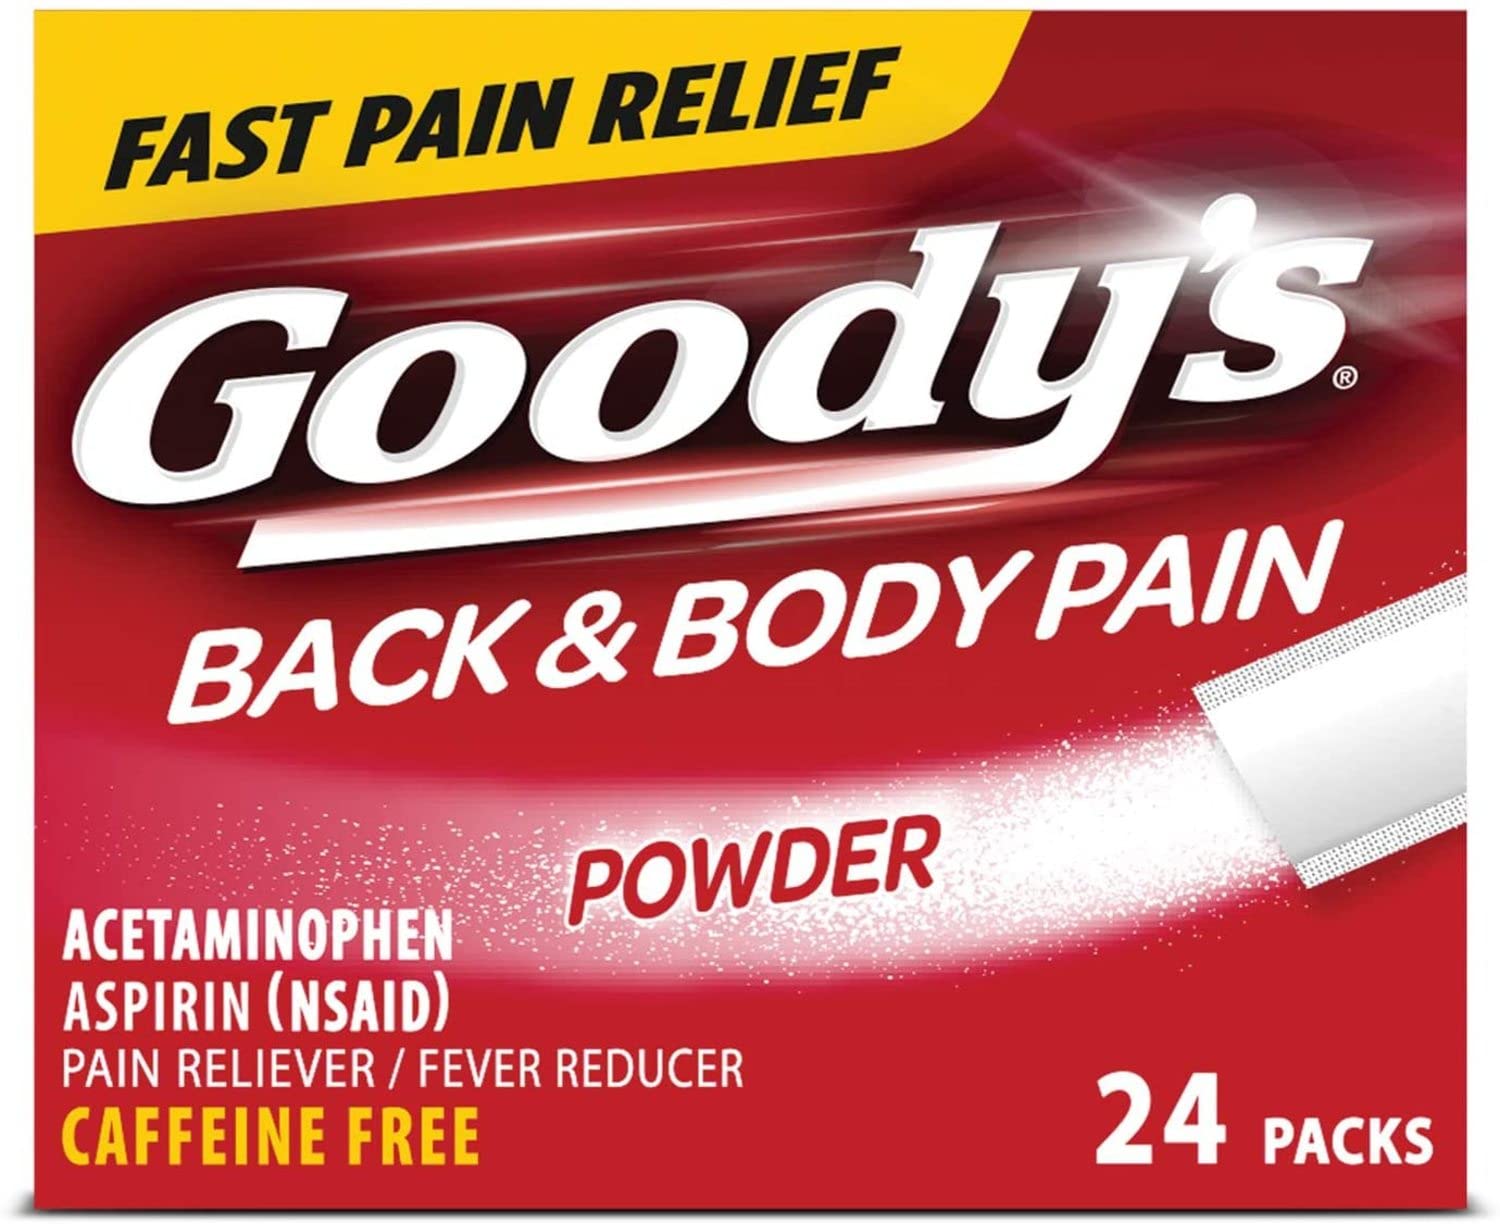 Goody's Hangover Relief Berry Citrus Fast Pain Relief Powders, 4